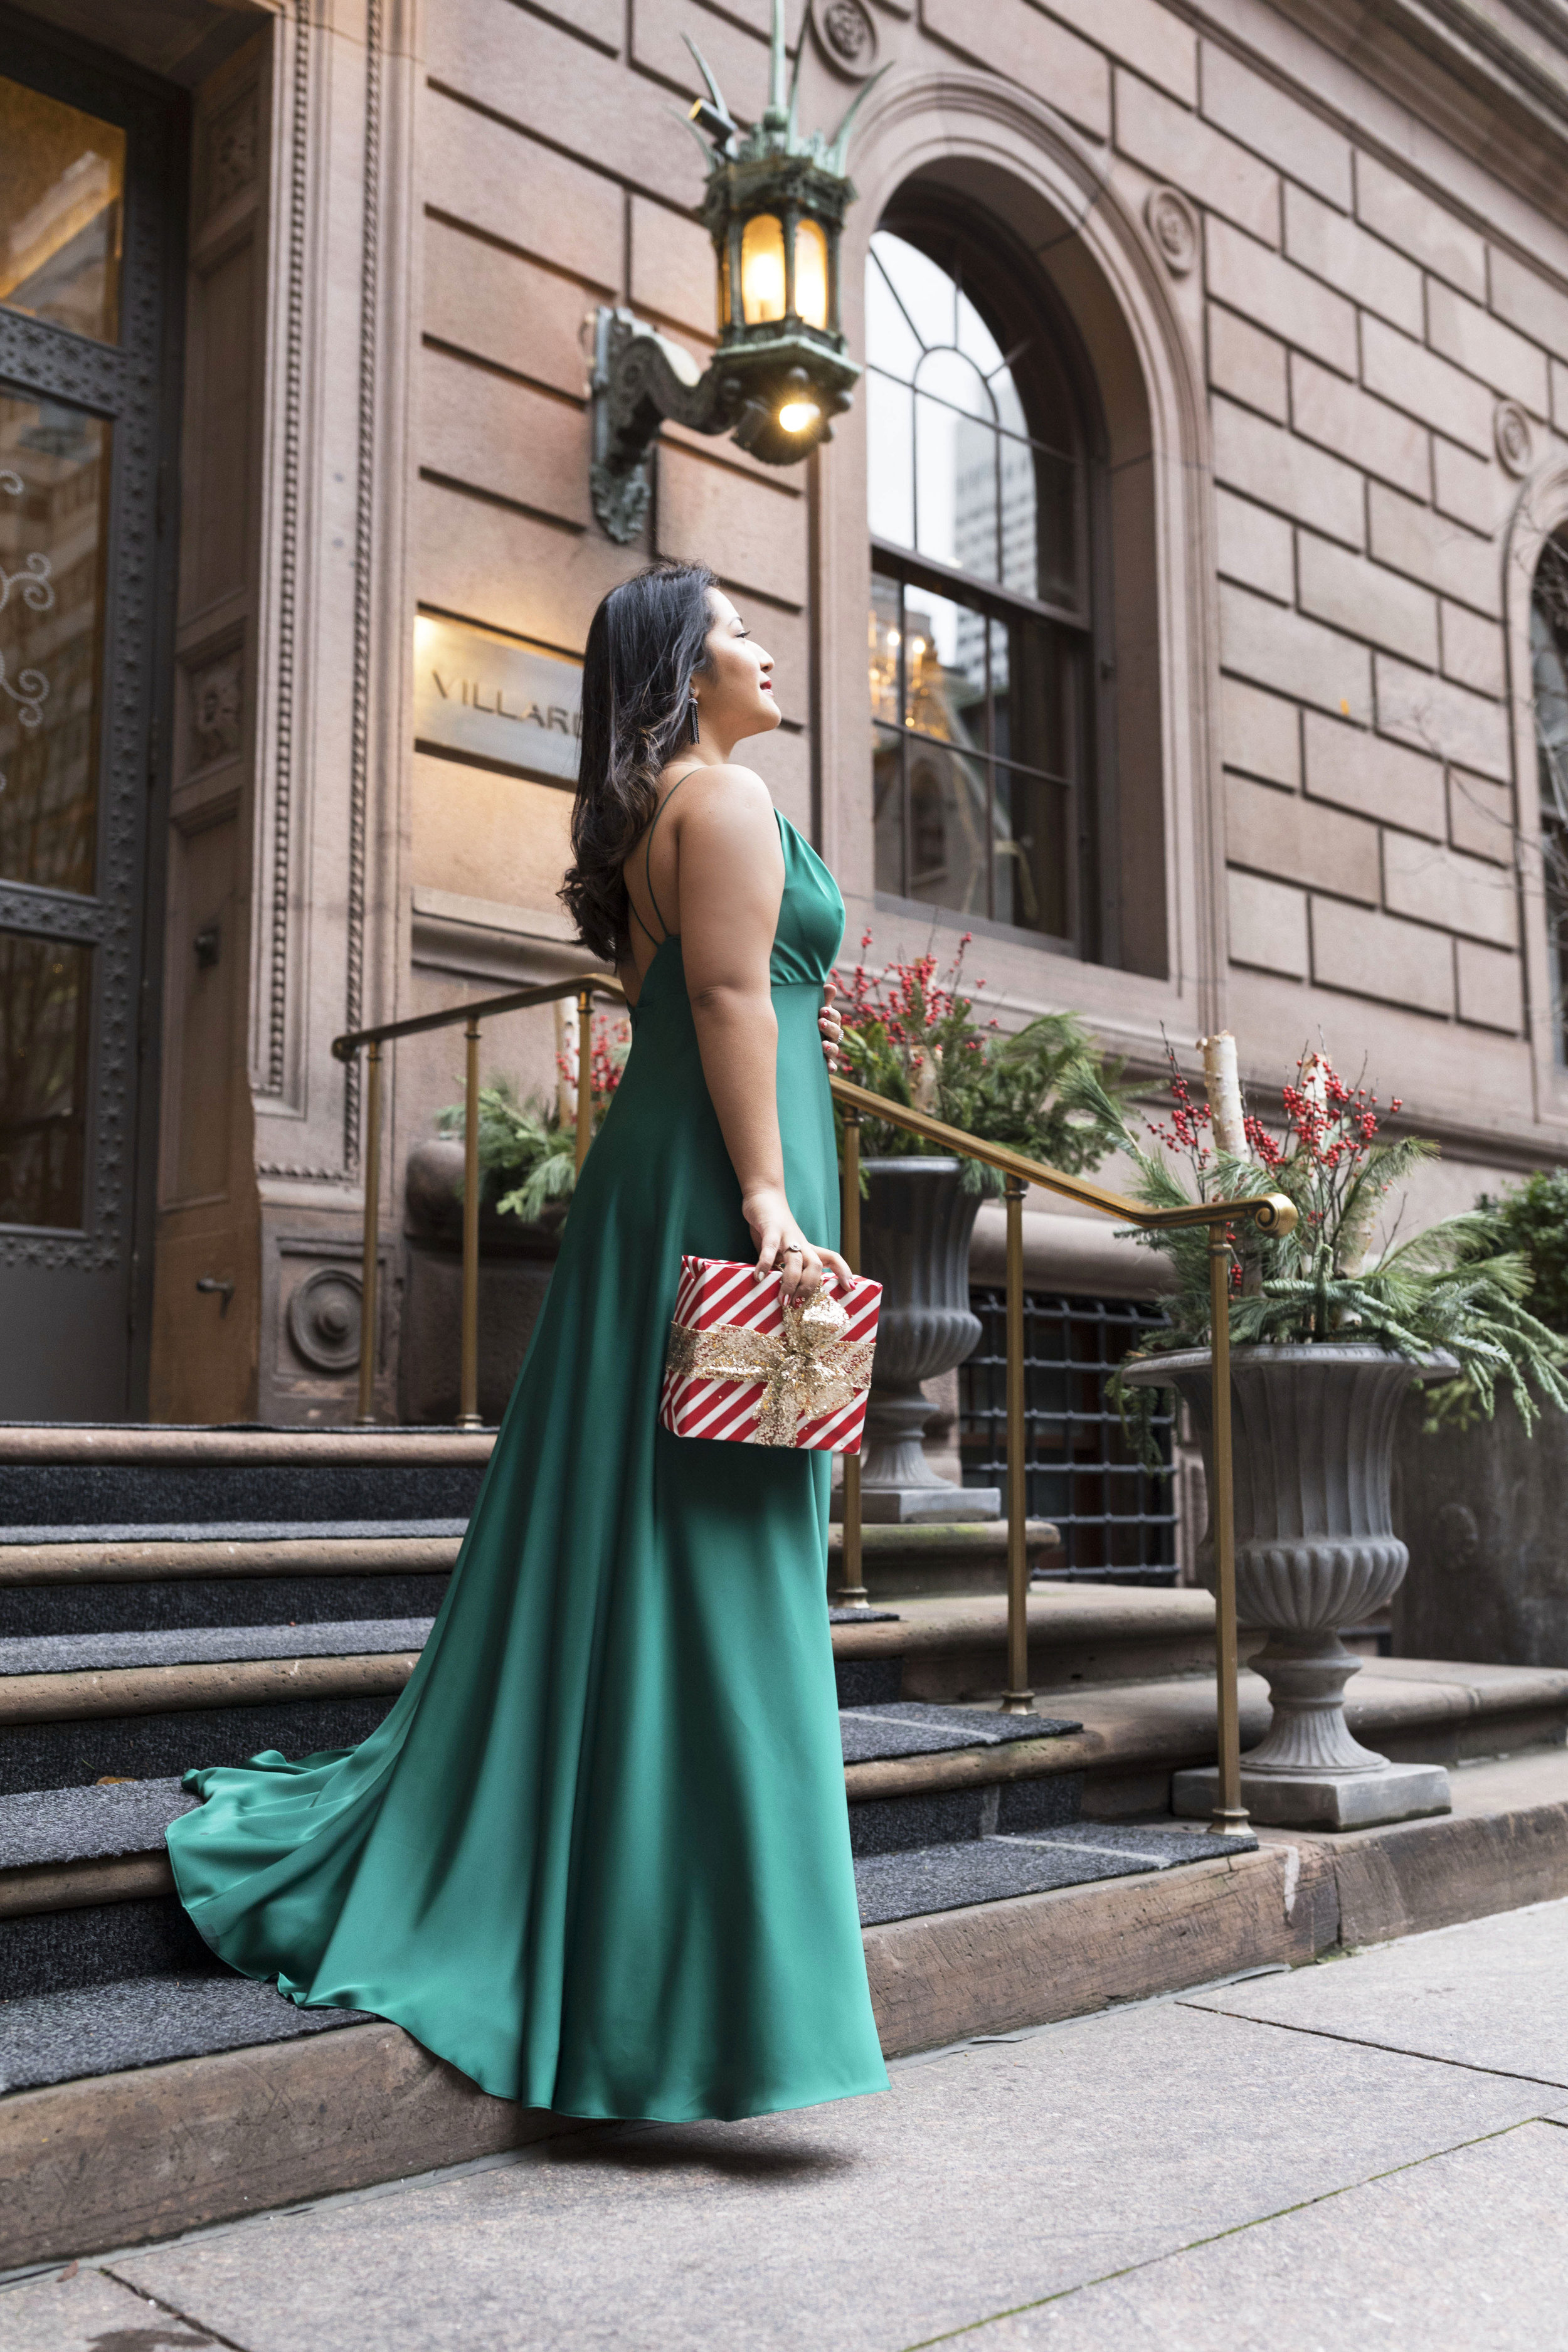 Krity S x Holiday Outfit x Forest Silk Aidan Mattox Gown 7.jpg